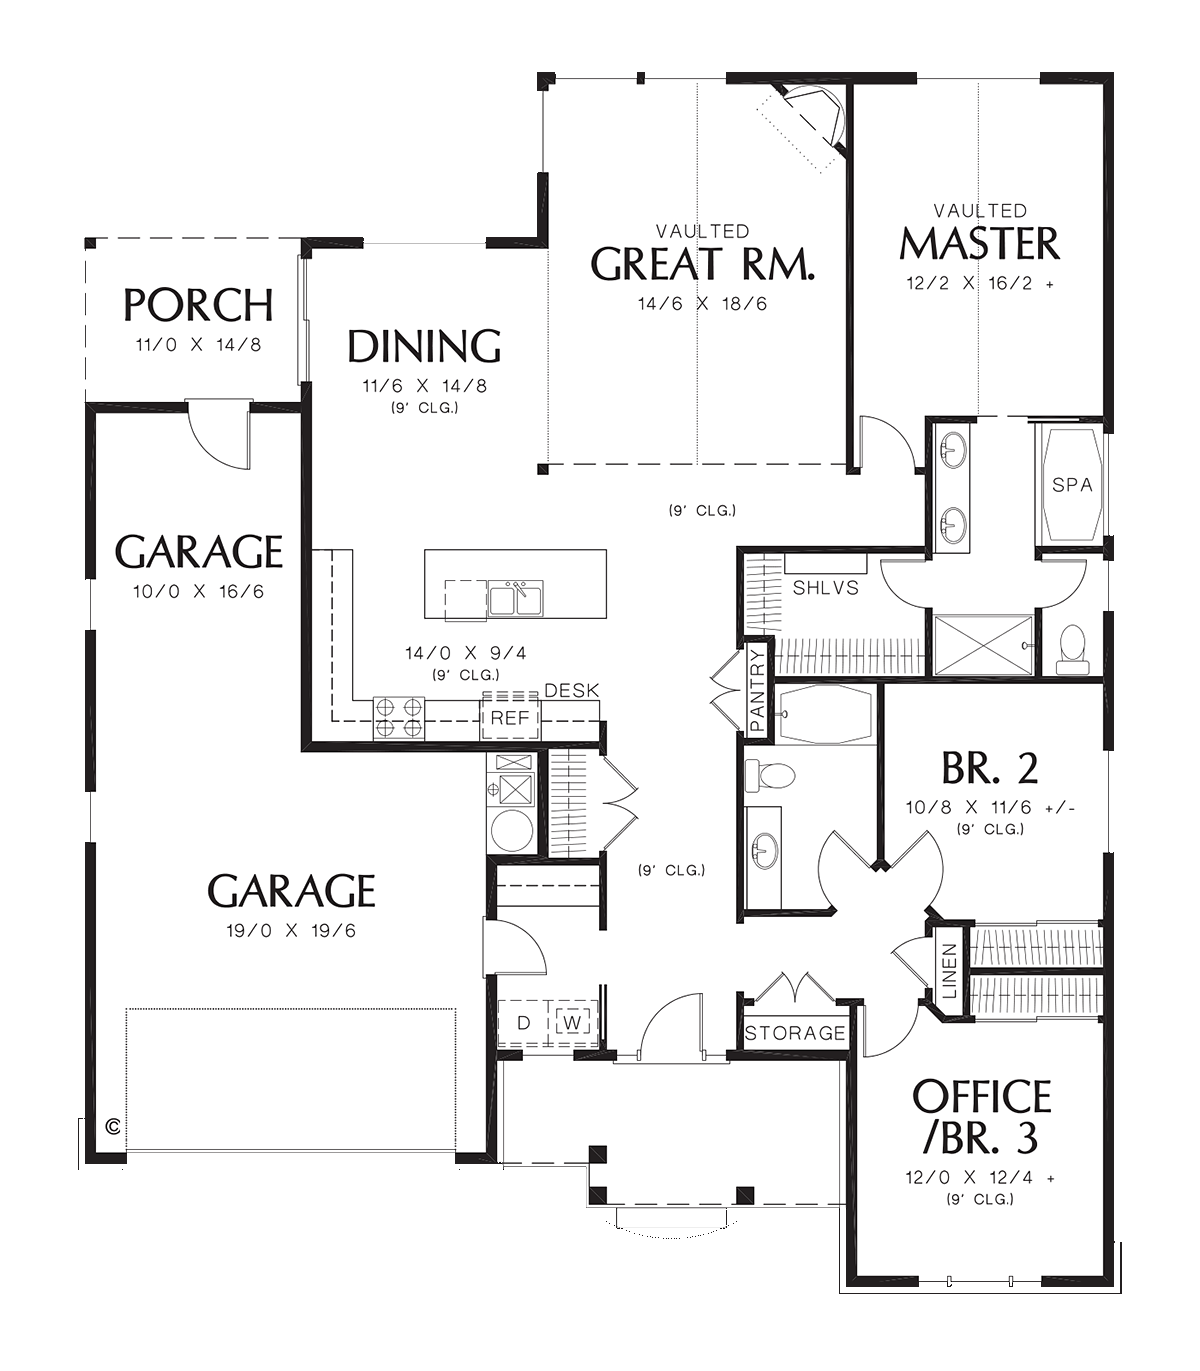 House Plan 81246 Ranch Style with 1800 Sq Ft, 3 Bed, 2 Bath